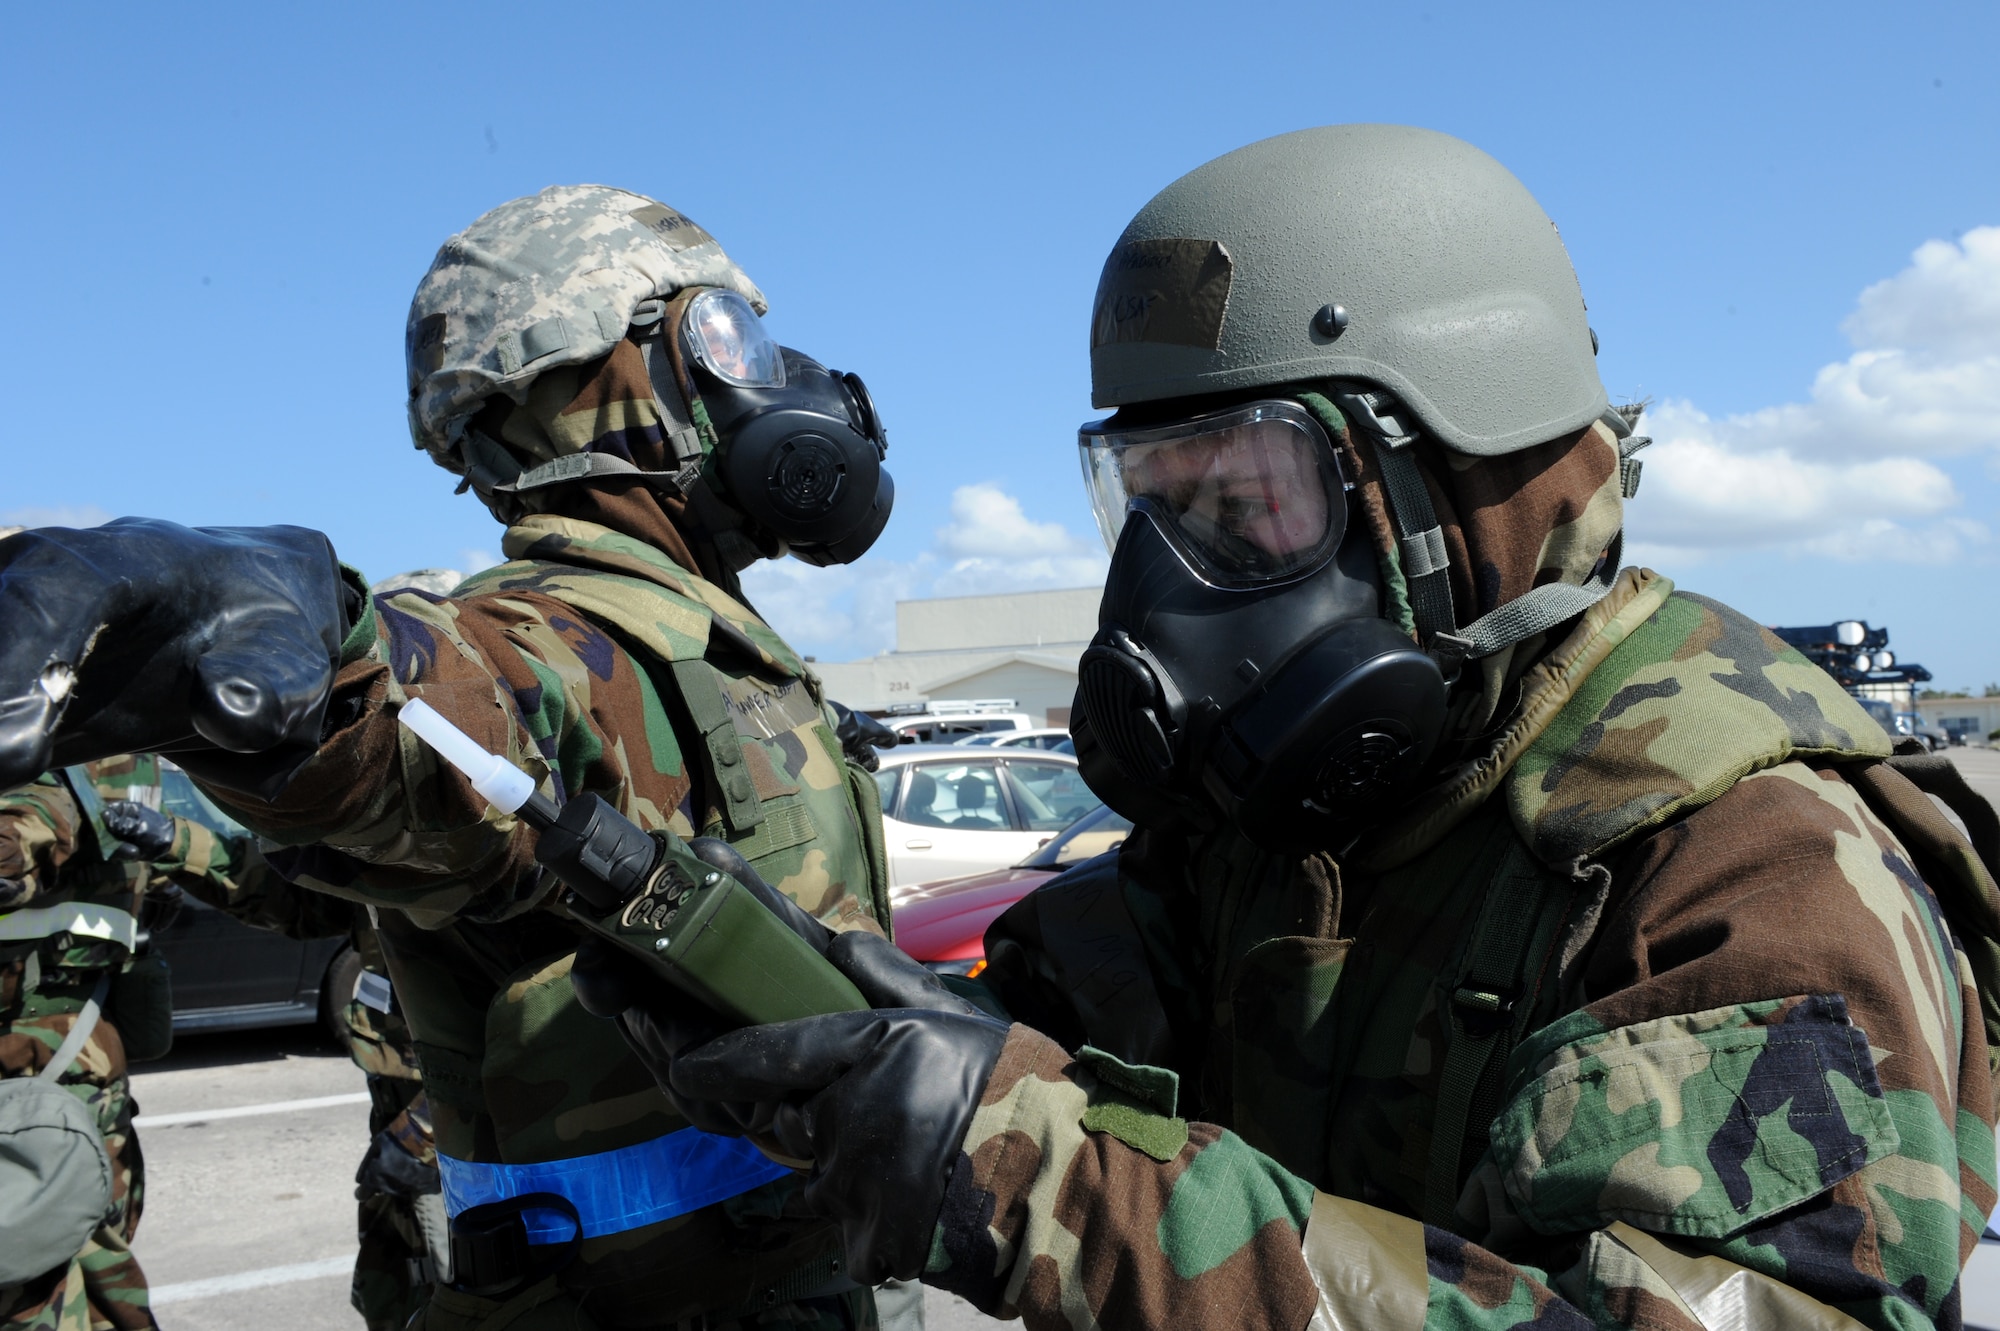 U.S. Air Force Airman 1st Class Zachary Paskovitch, 18th Civil Engineer Squadron emergency management responder, monitors an Airman who is simulating being contaminated with hazardous chemicals during a Mission Focused Exercise on Kadena Air Base, Japan, Jan. 30, 2014. Airmen who have been contaminated must report to a contamination control area where members from the 18th CES emergency management team will safely monitor and decontaminate them, returning them to their units with new gear so they can continue their mission. (U.S. Air Force photo by Airman 1st Class Hailey R. Staker)